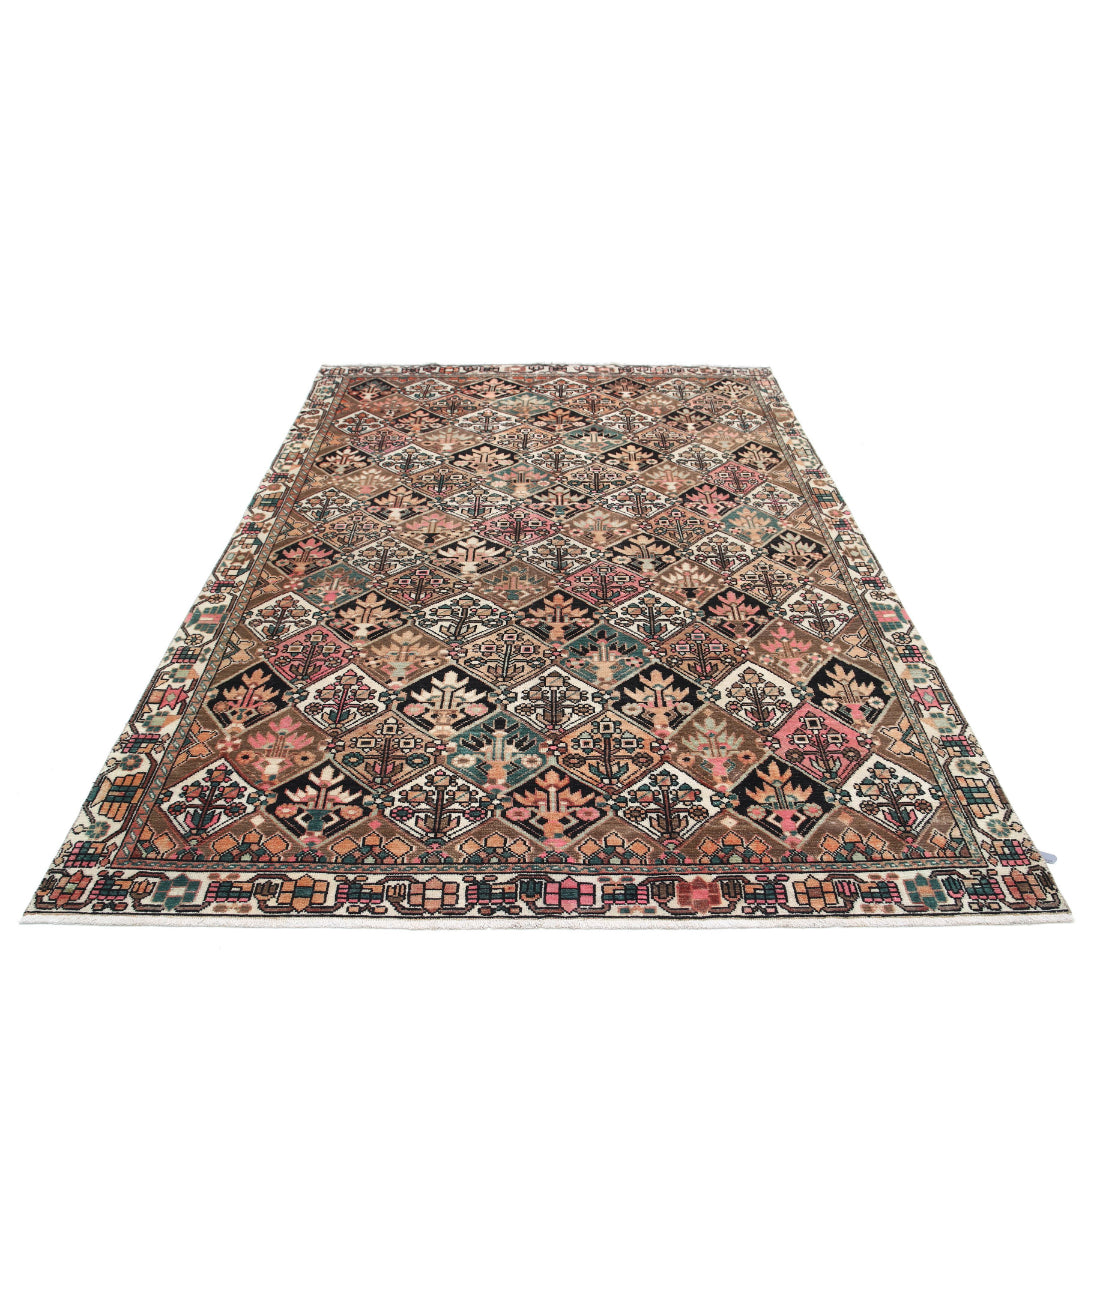 Hand Knotted Vintage Persian Bakhtiari Wool Rug - 6'7'' x 9'6'' 6'7'' x 9'6'' (198 X 285) / Brown / Ivory